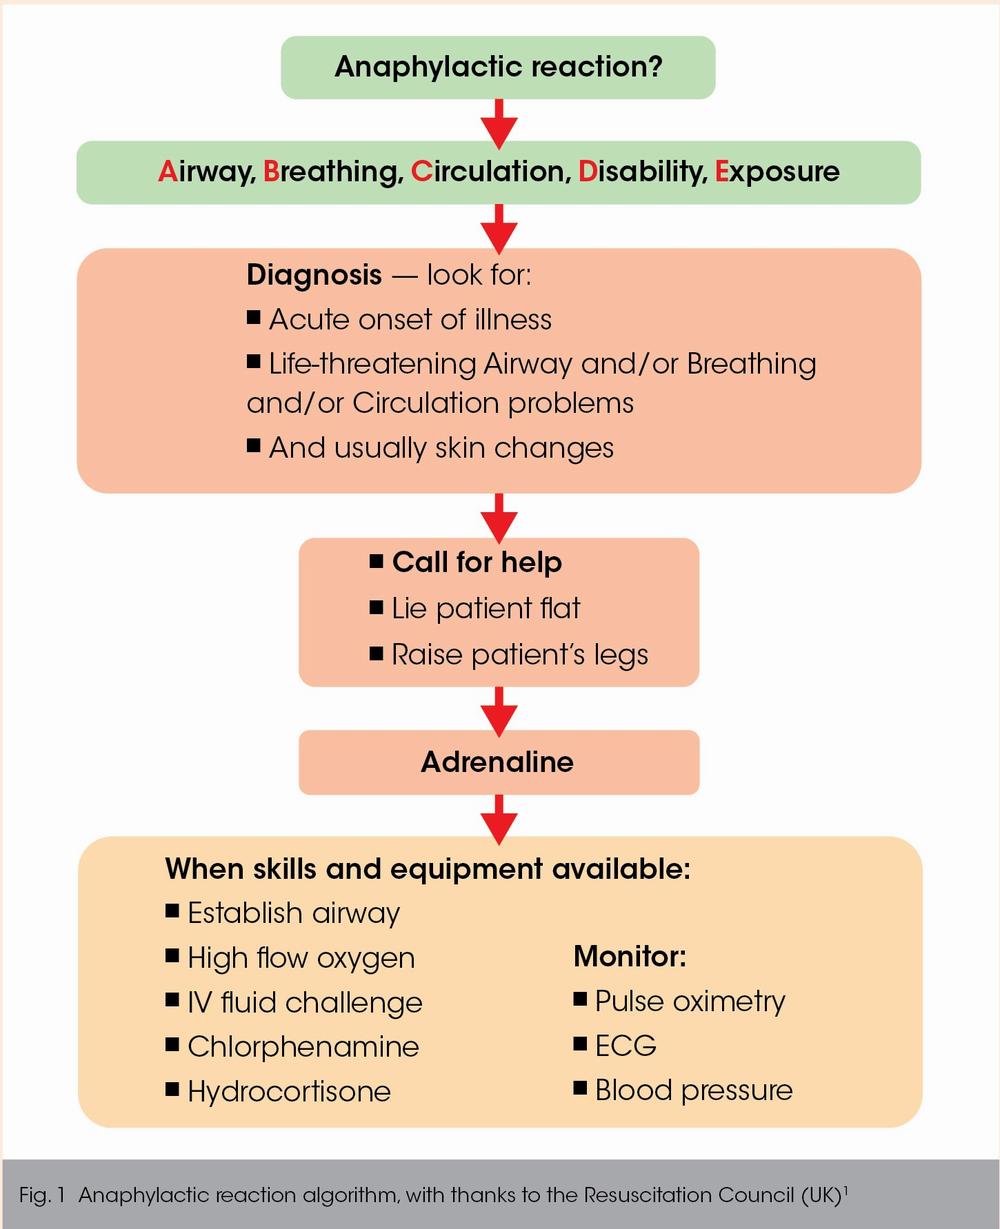 A medical algorithm for recognizing and treating anaphylactic reactions.